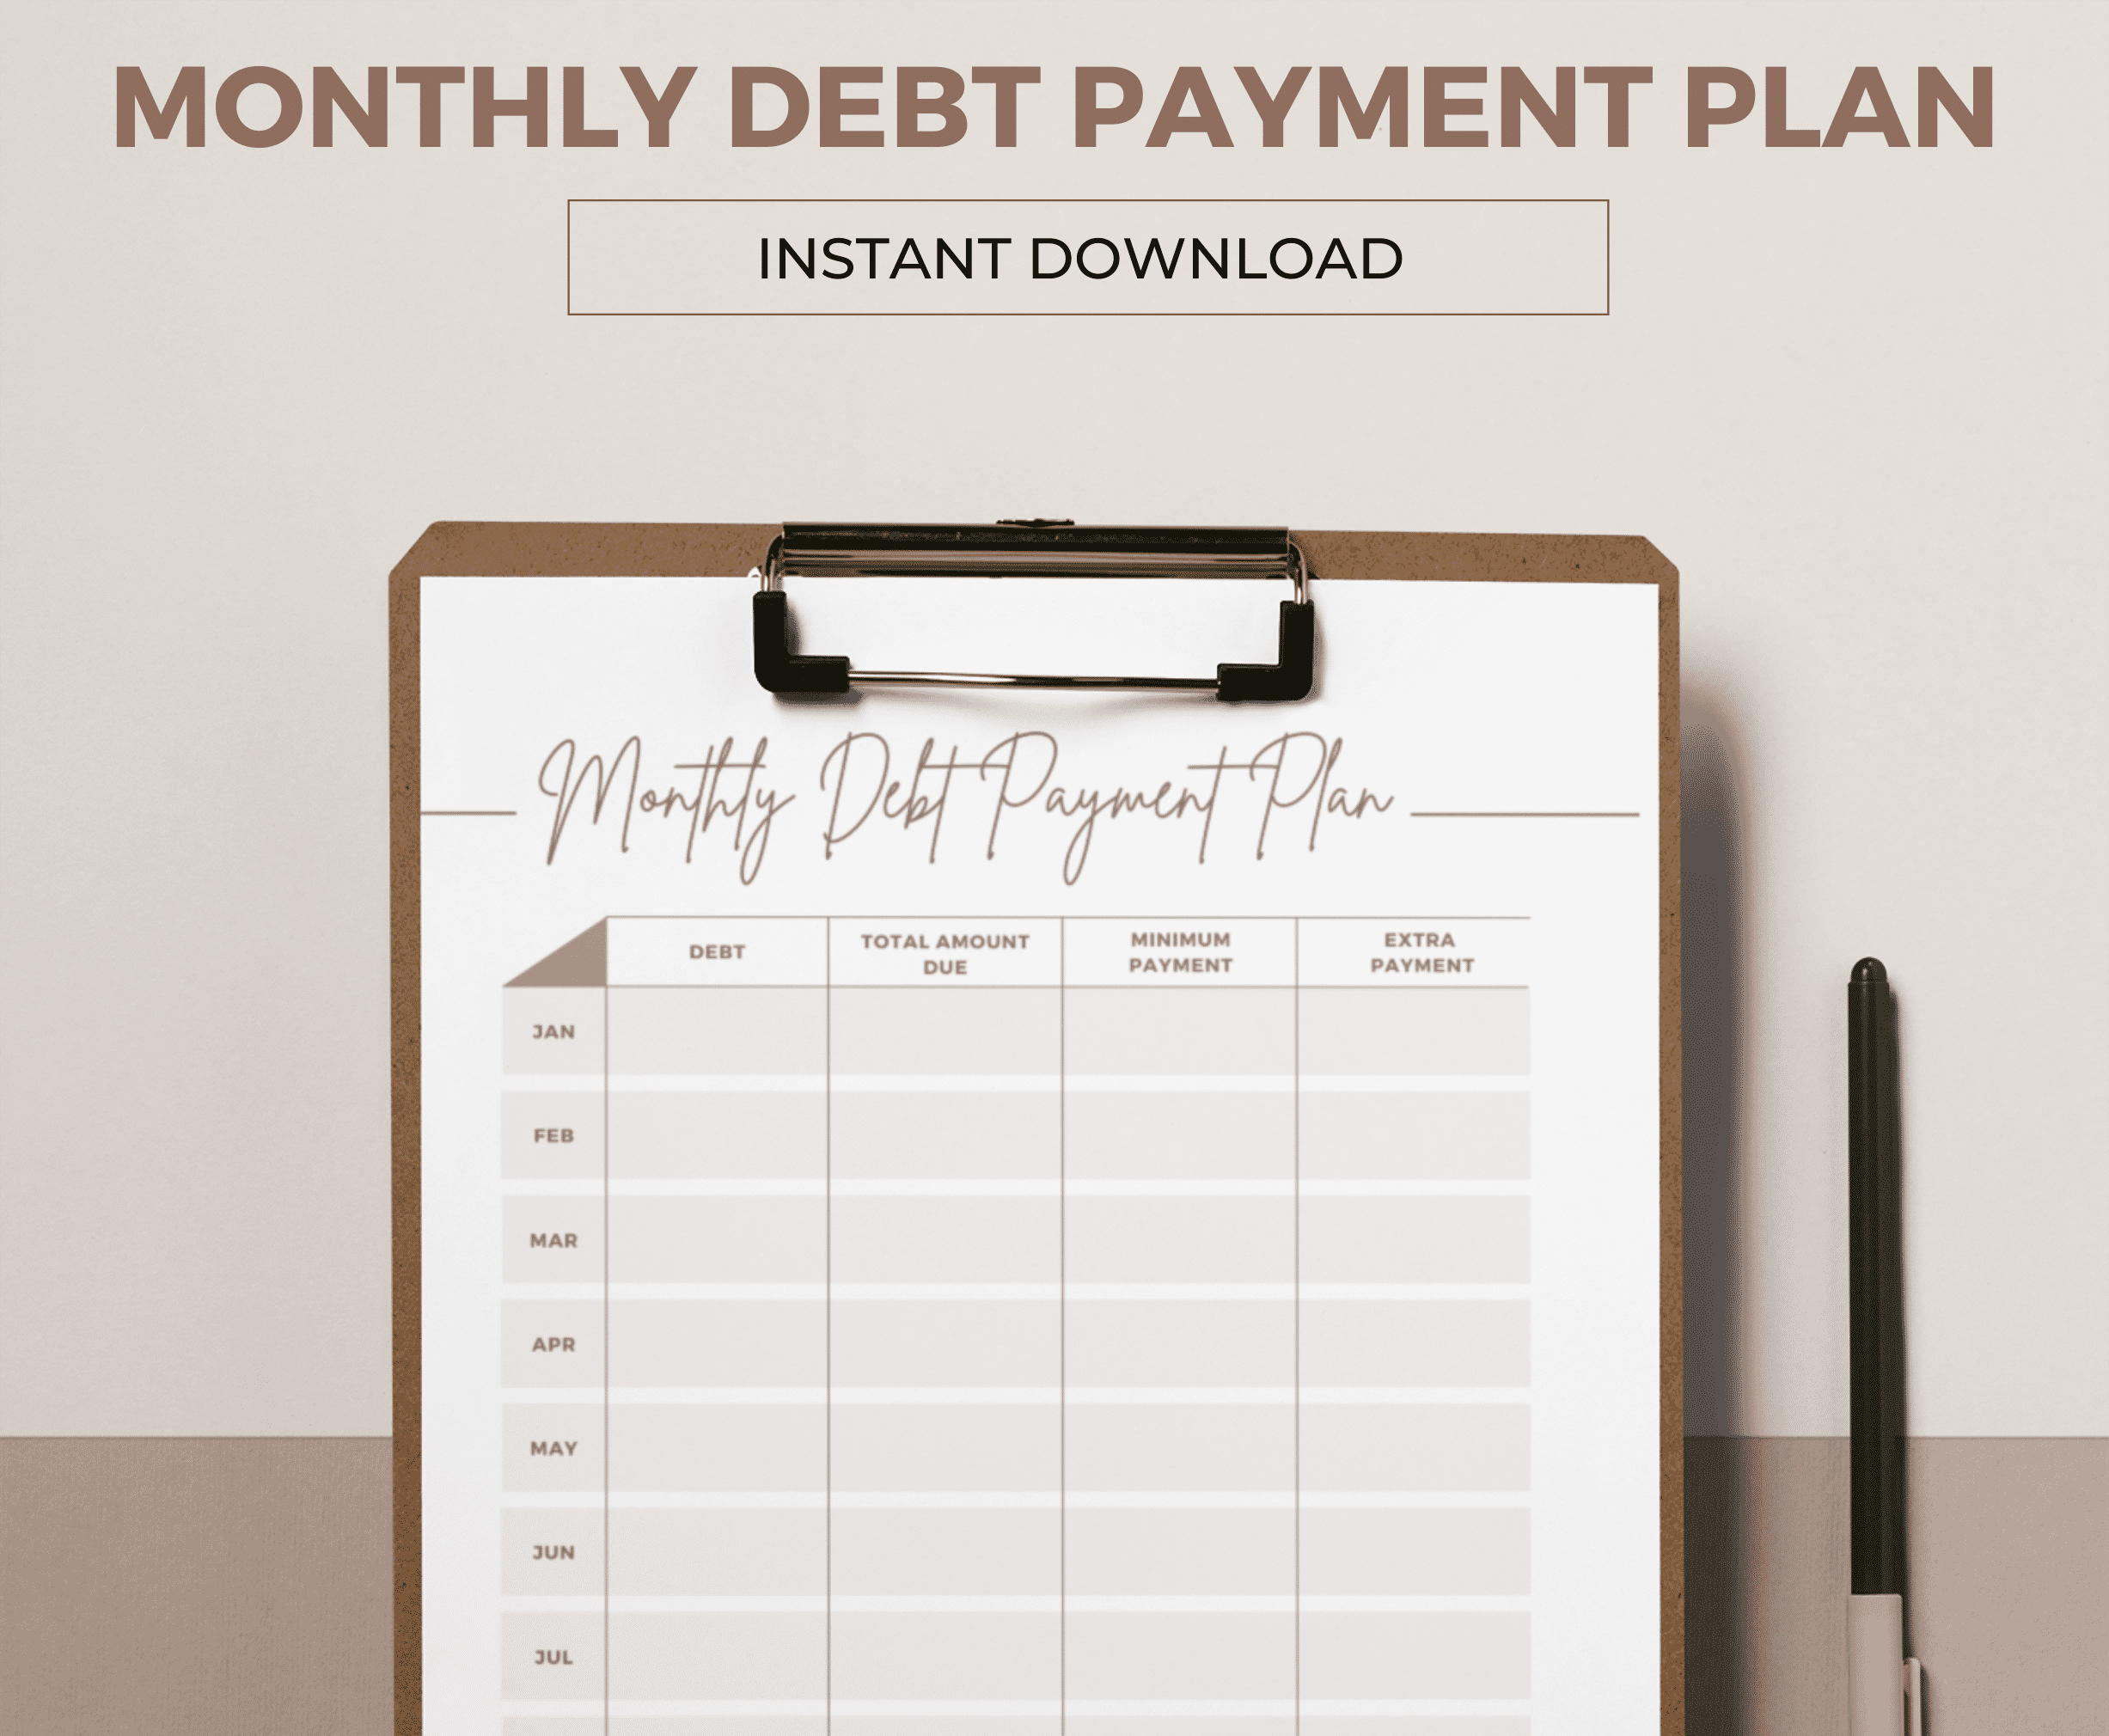 Monthly Debt Payment Plan